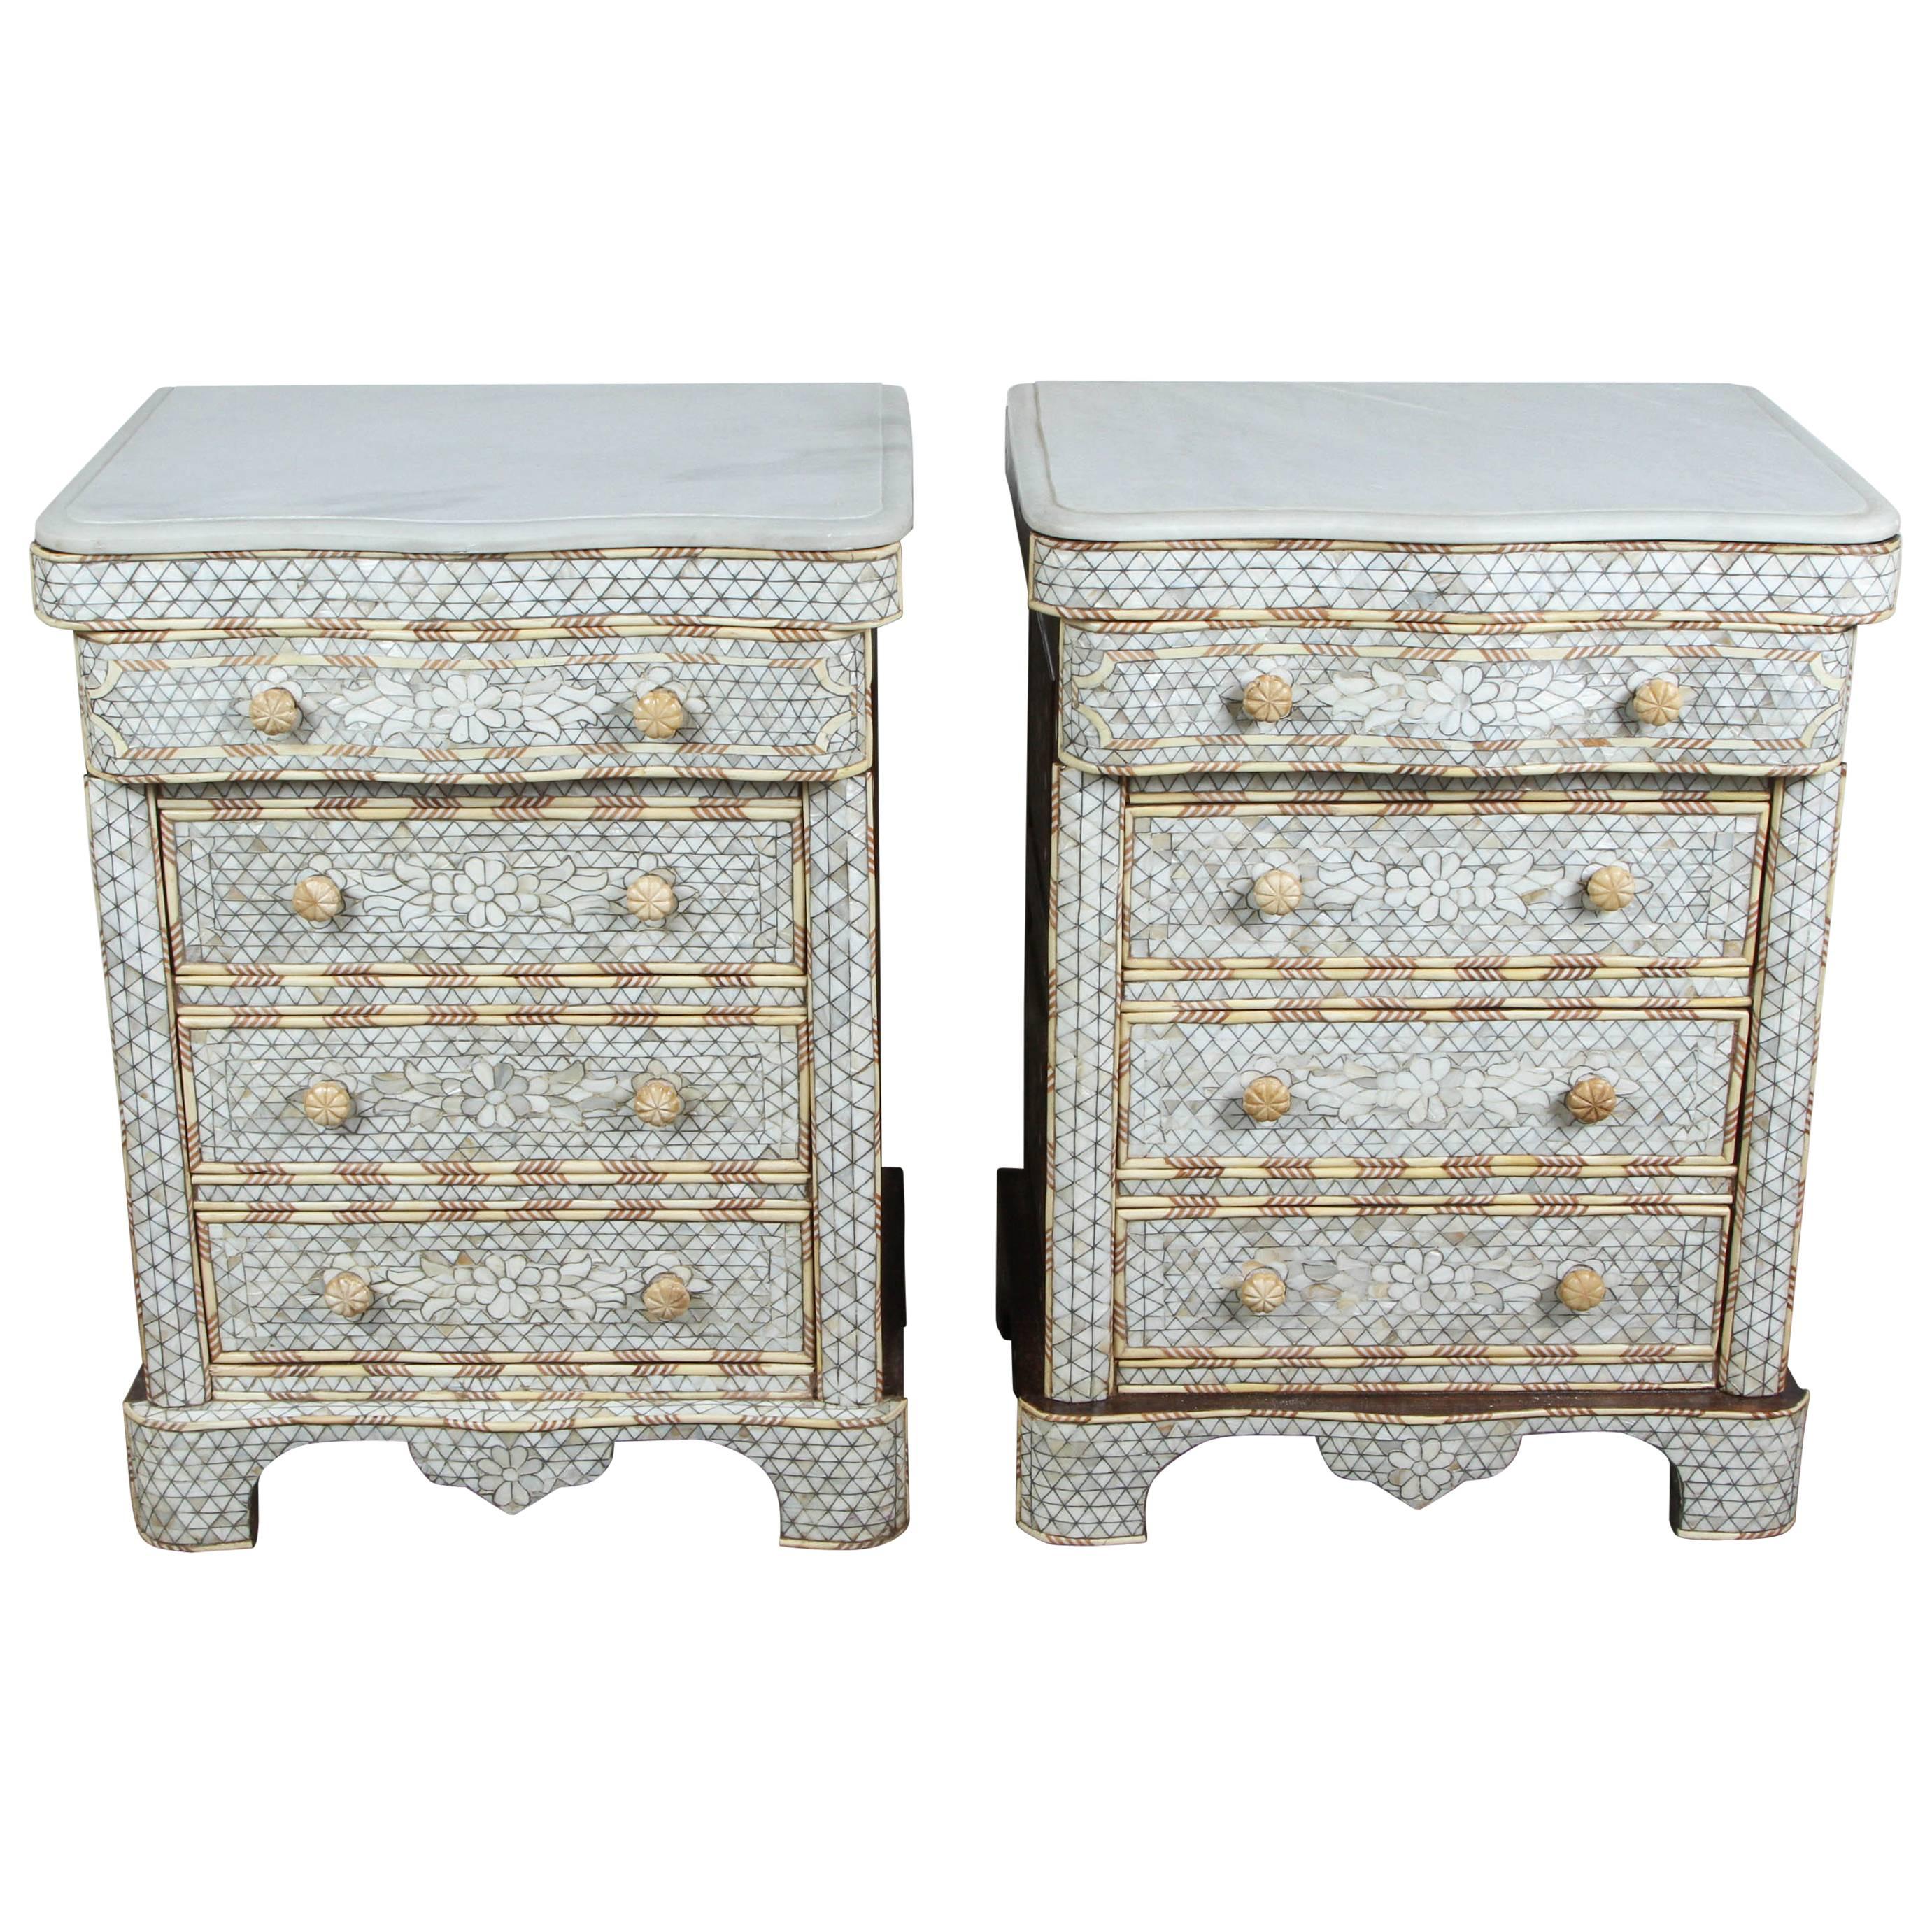 Pair of Mother-of-Pearl Inlay Syrian Nightstands